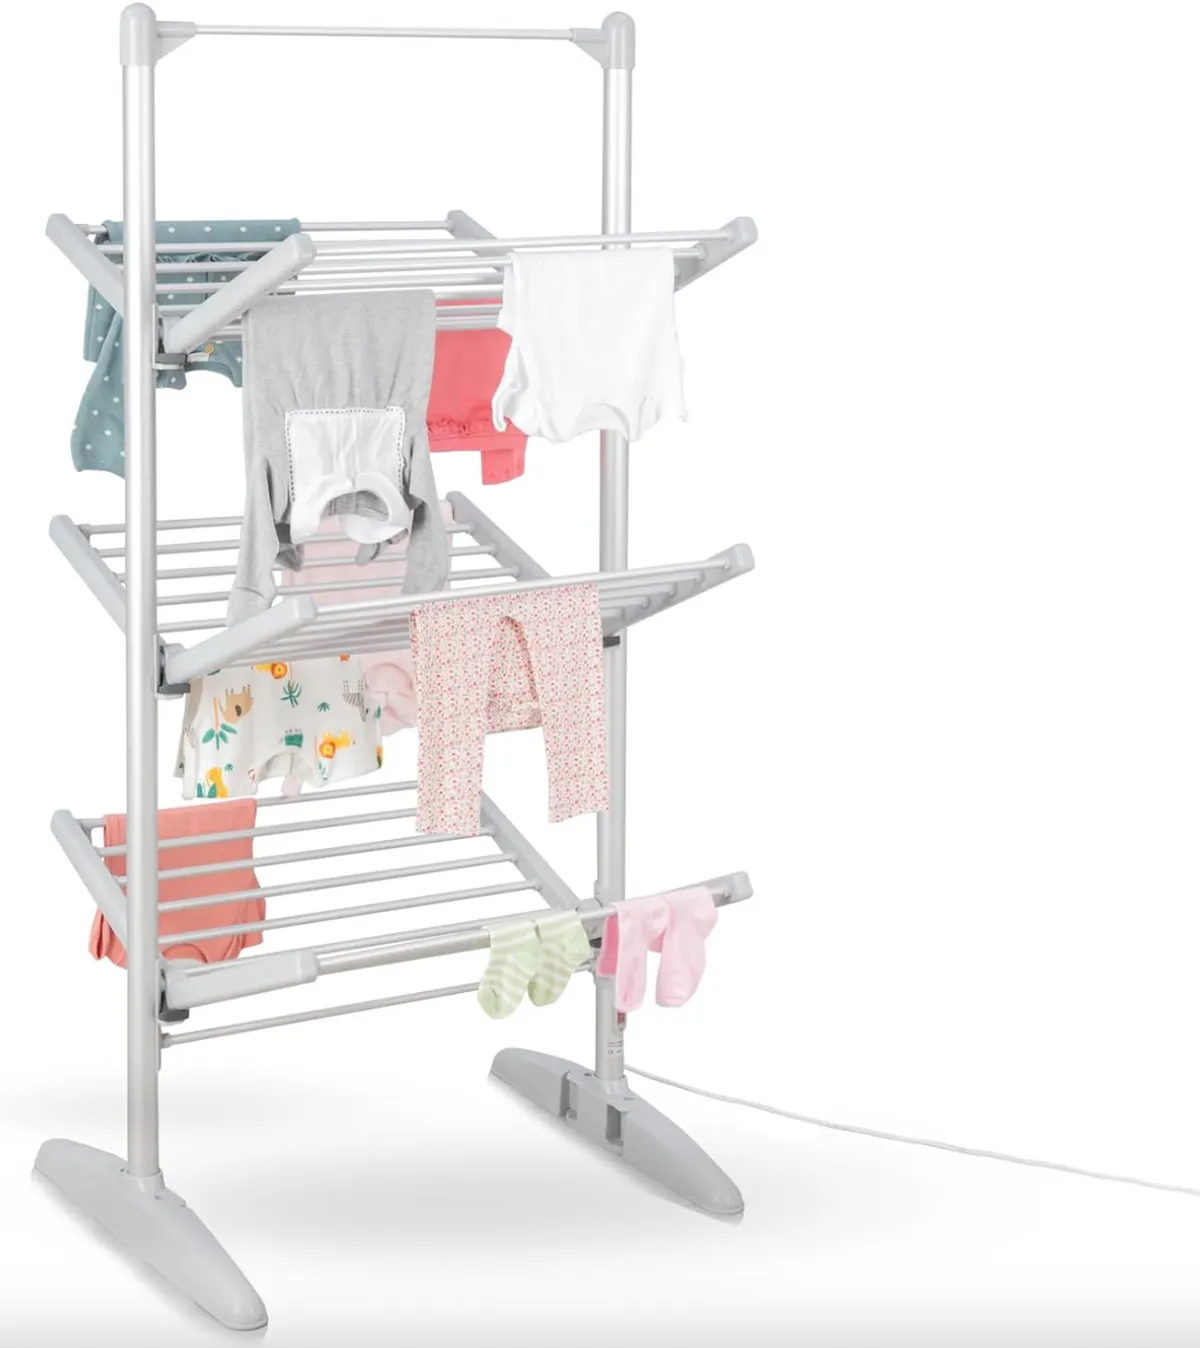 Minky SureDri 3 Tier Heated Clothes Airer - £130 £119.98 (save 8%)